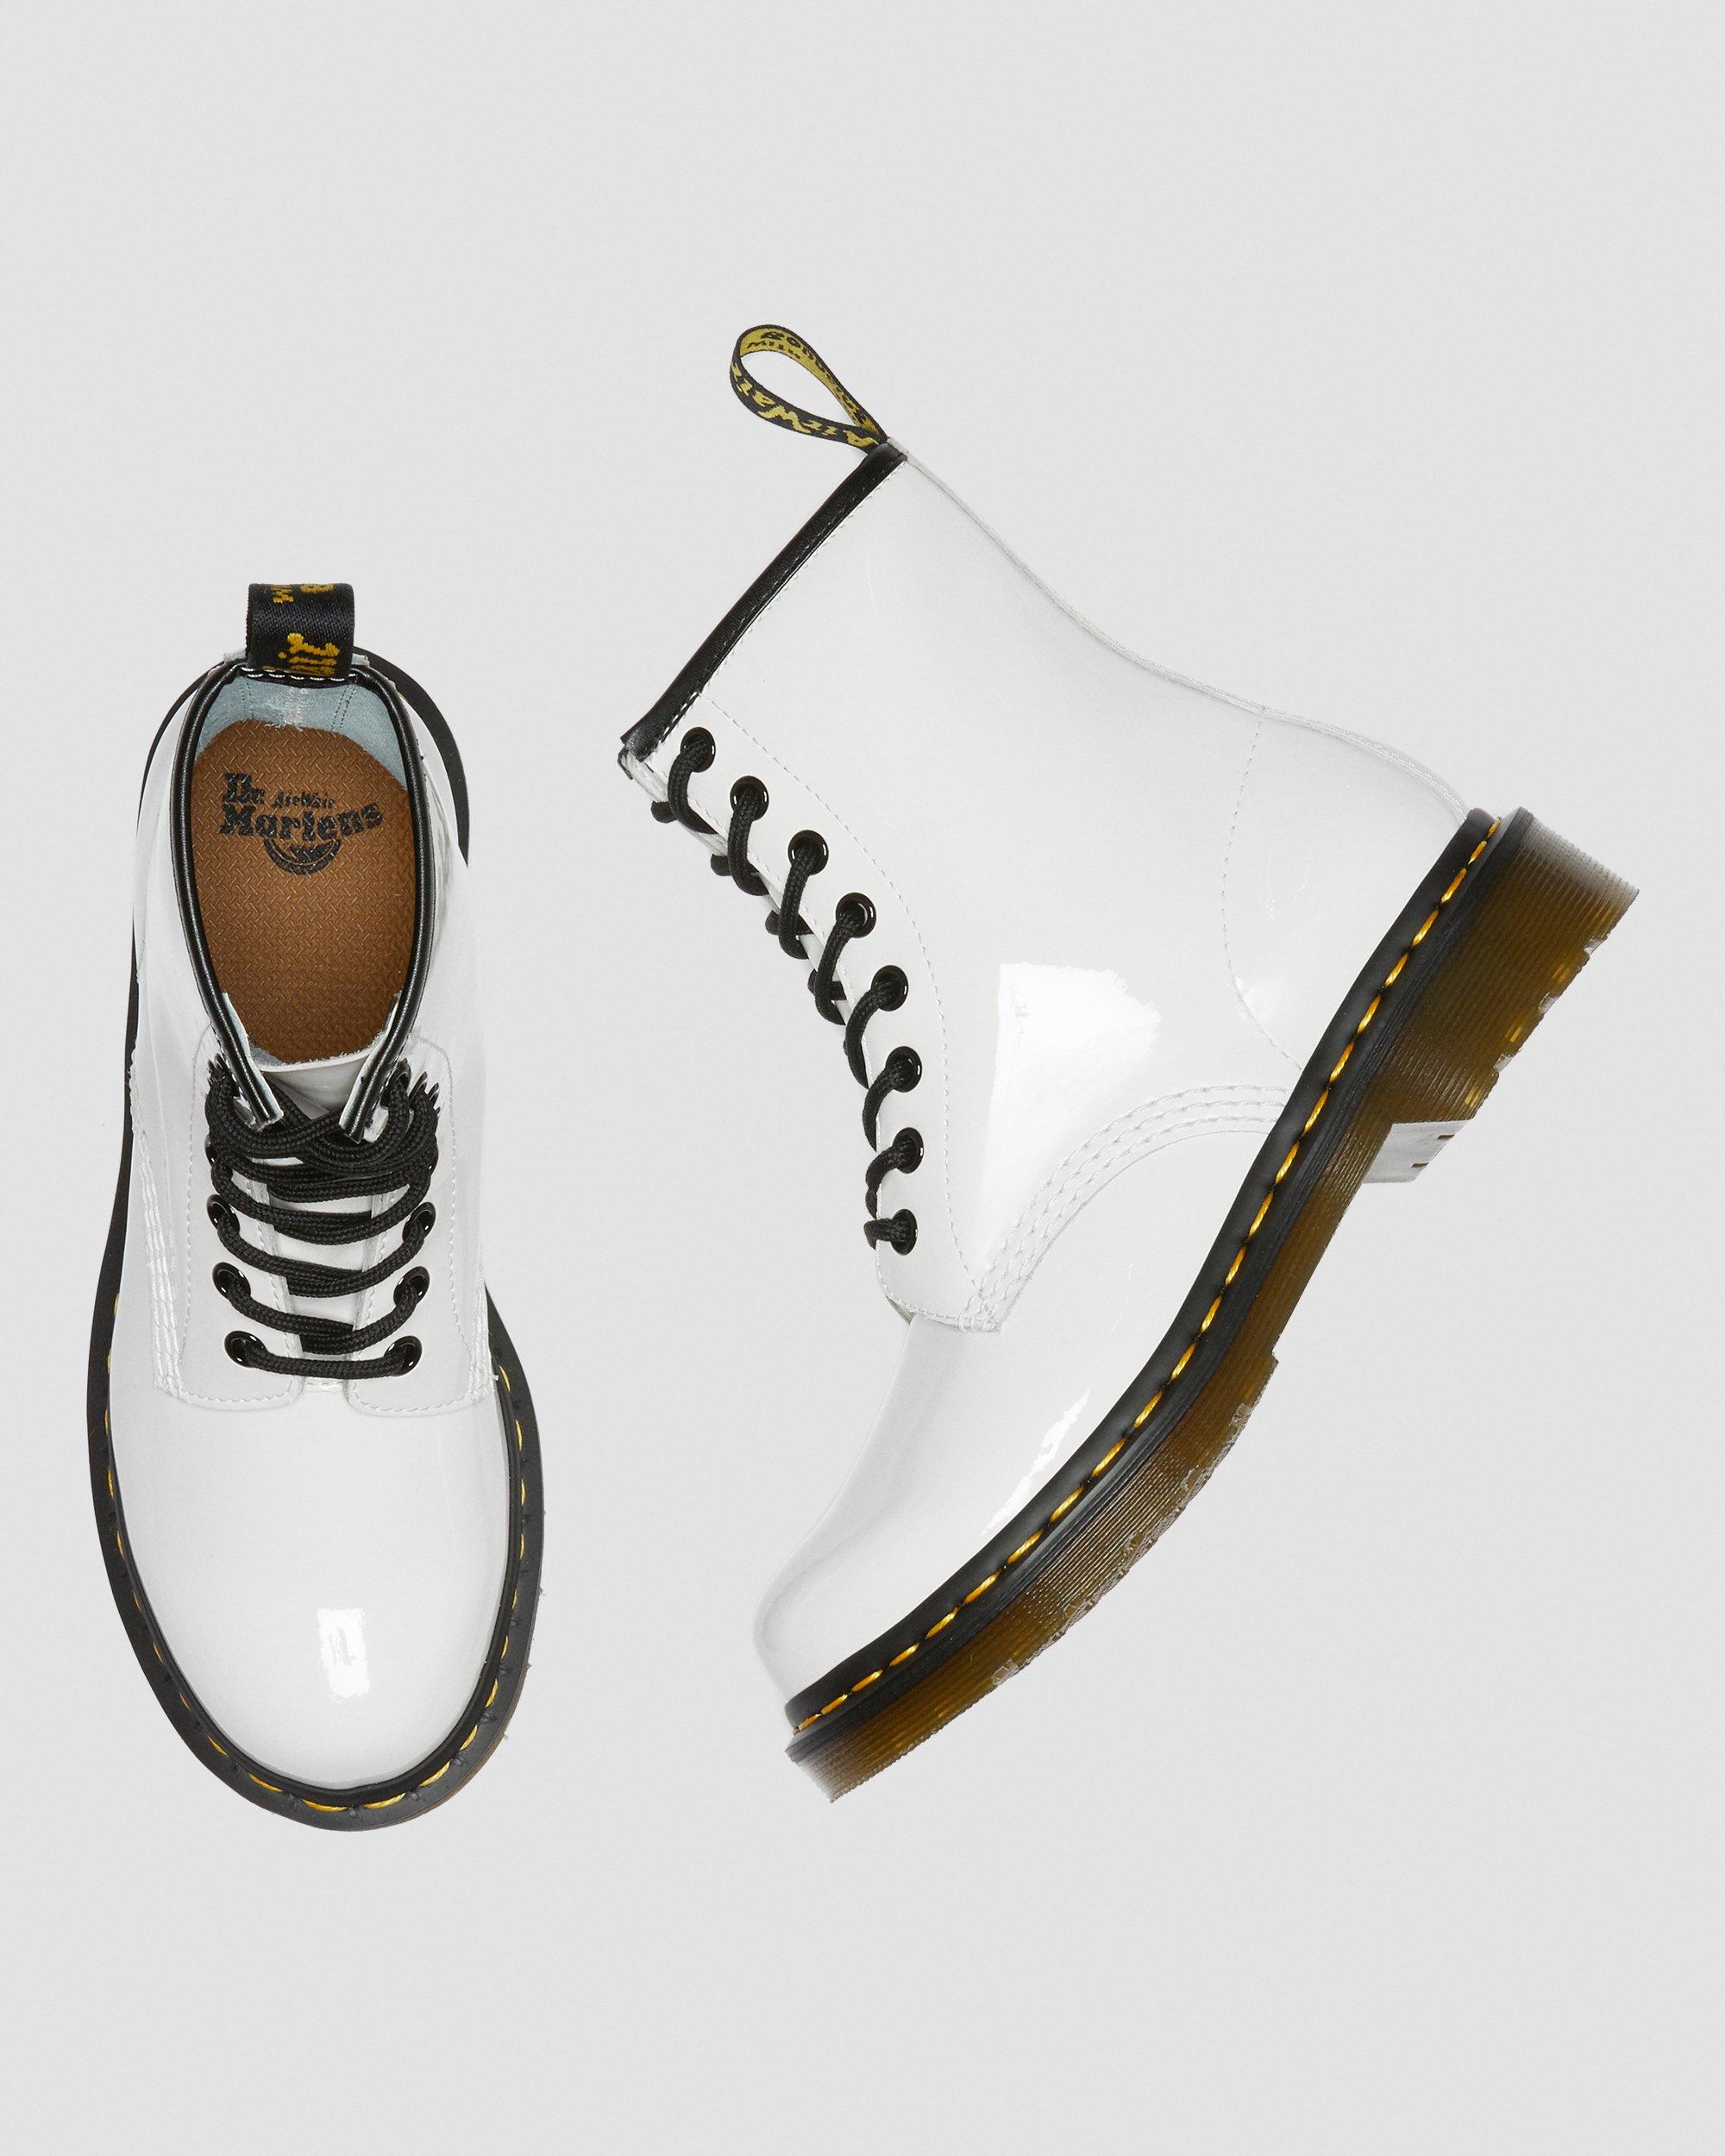 1460 Women's Patent Leather Lace Up Boots | Dr. Martens